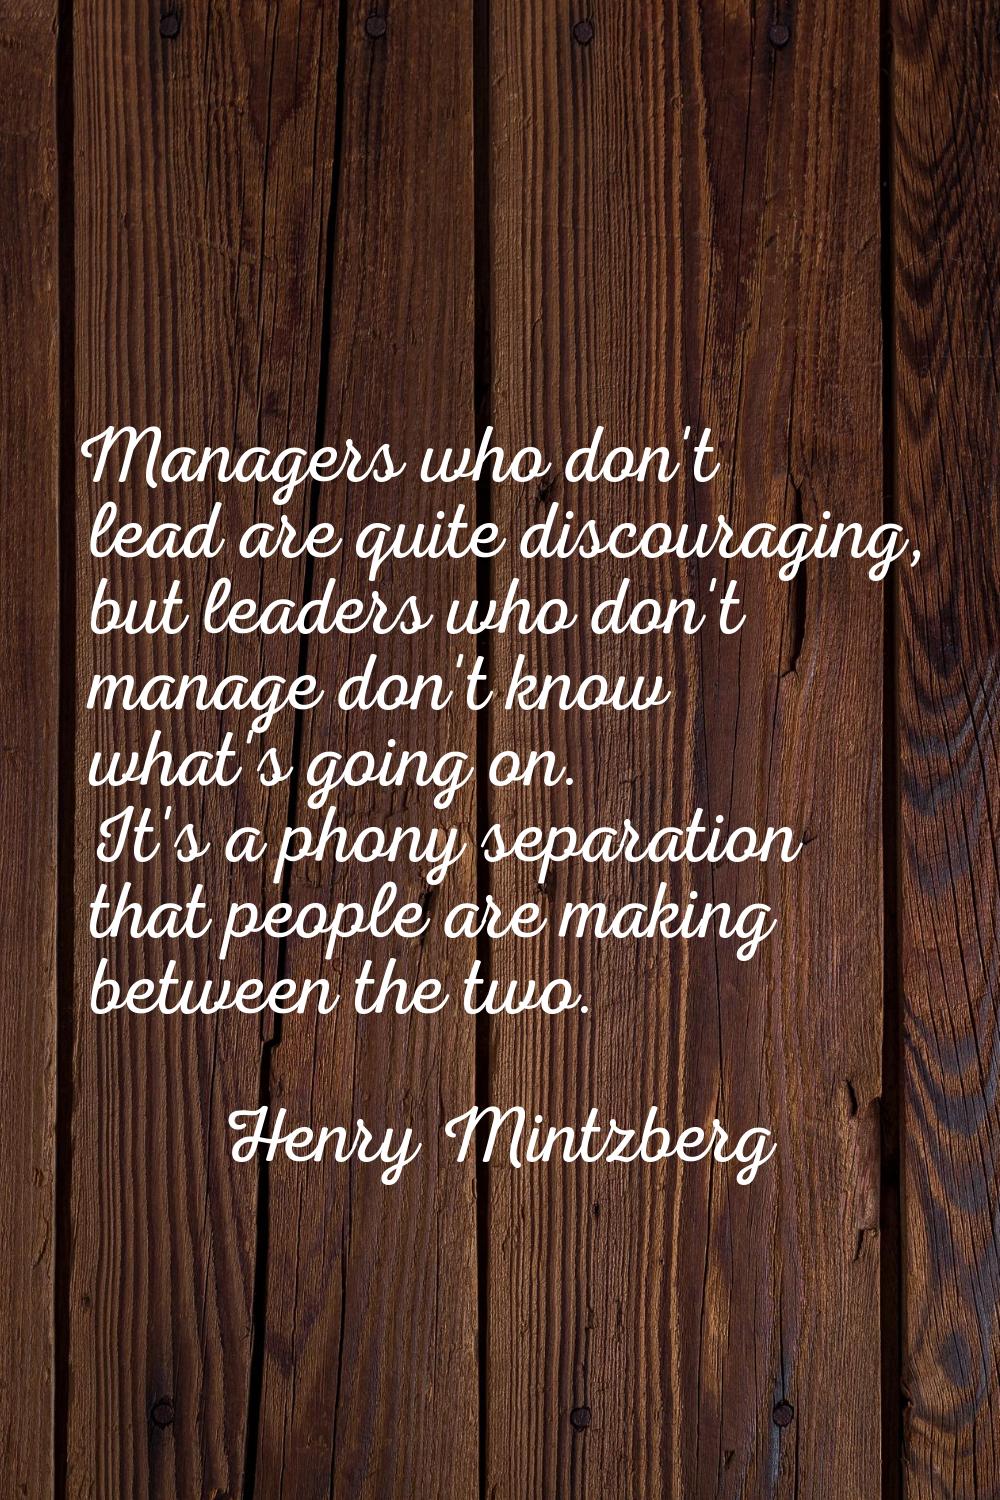 Managers who don't lead are quite discouraging, but leaders who don't manage don't know what's goin